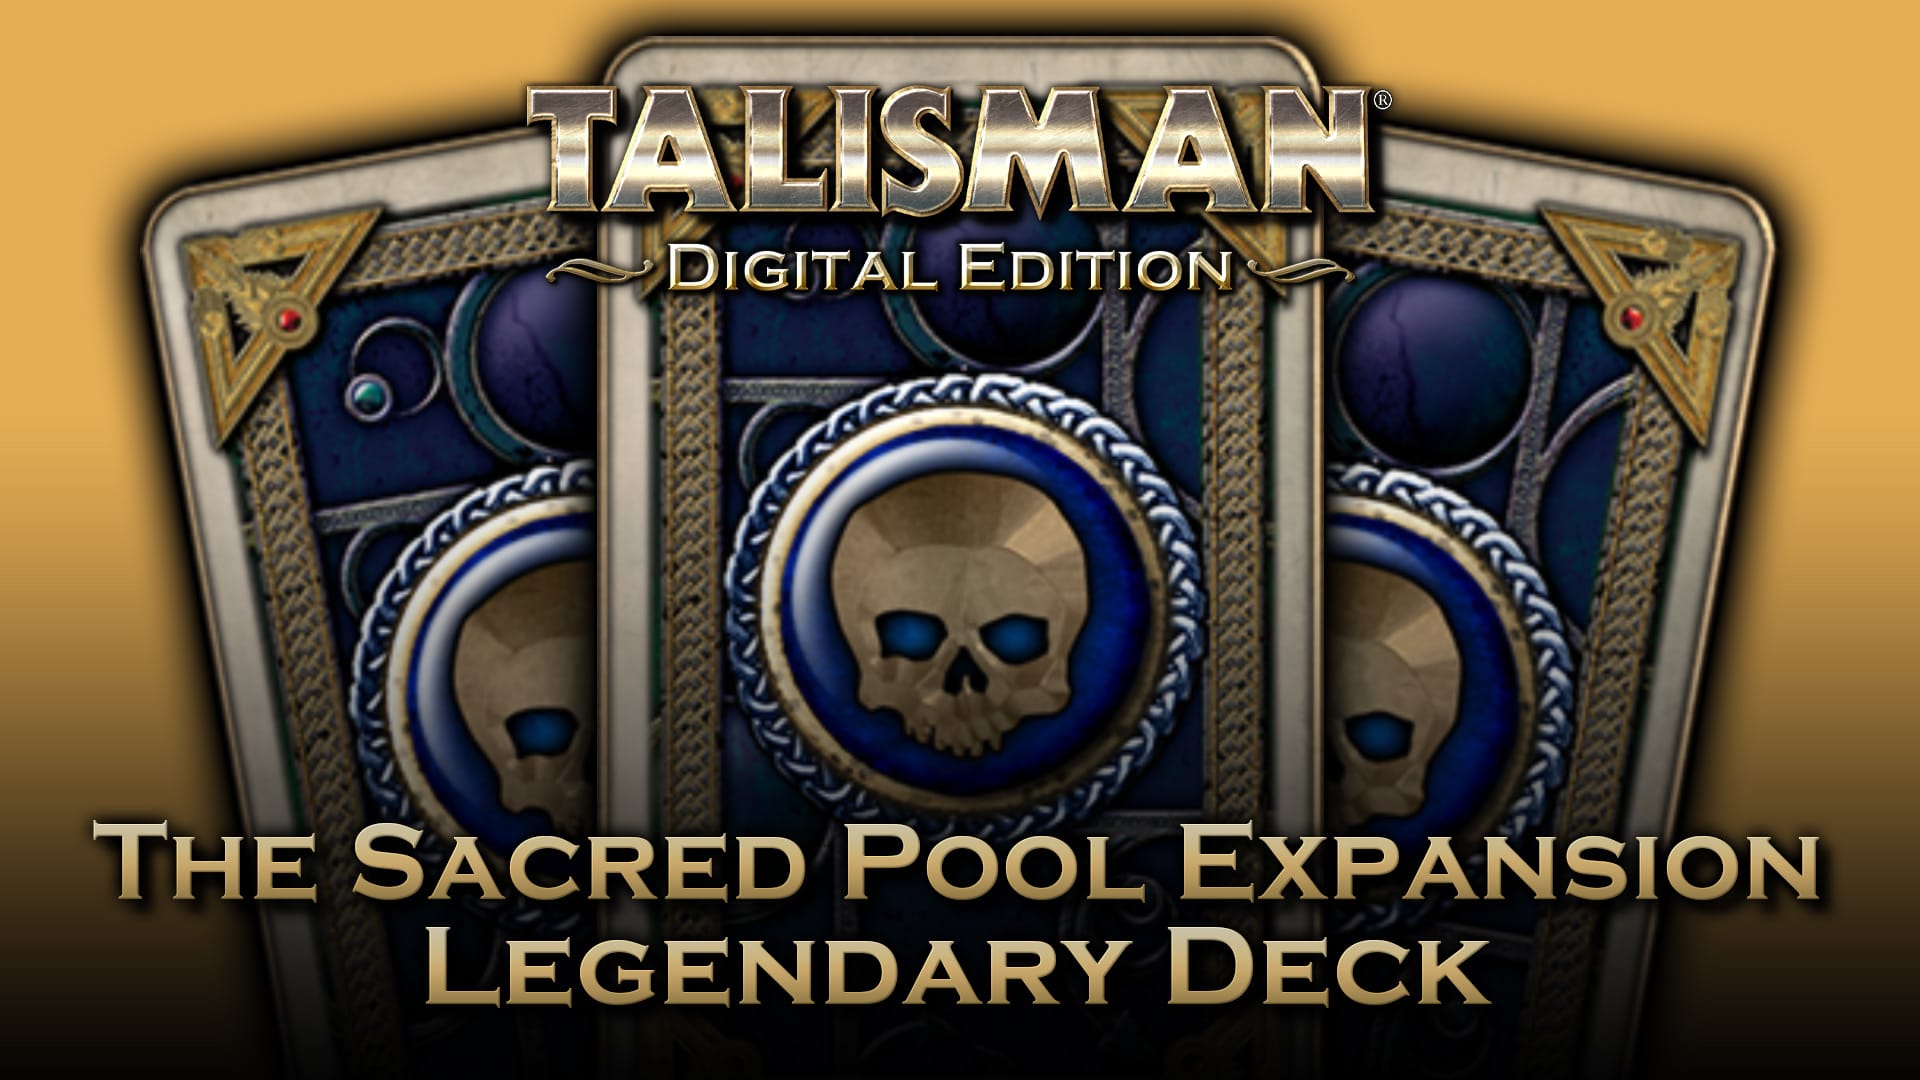 The Sacred Pool Expansion: Legendary Deck